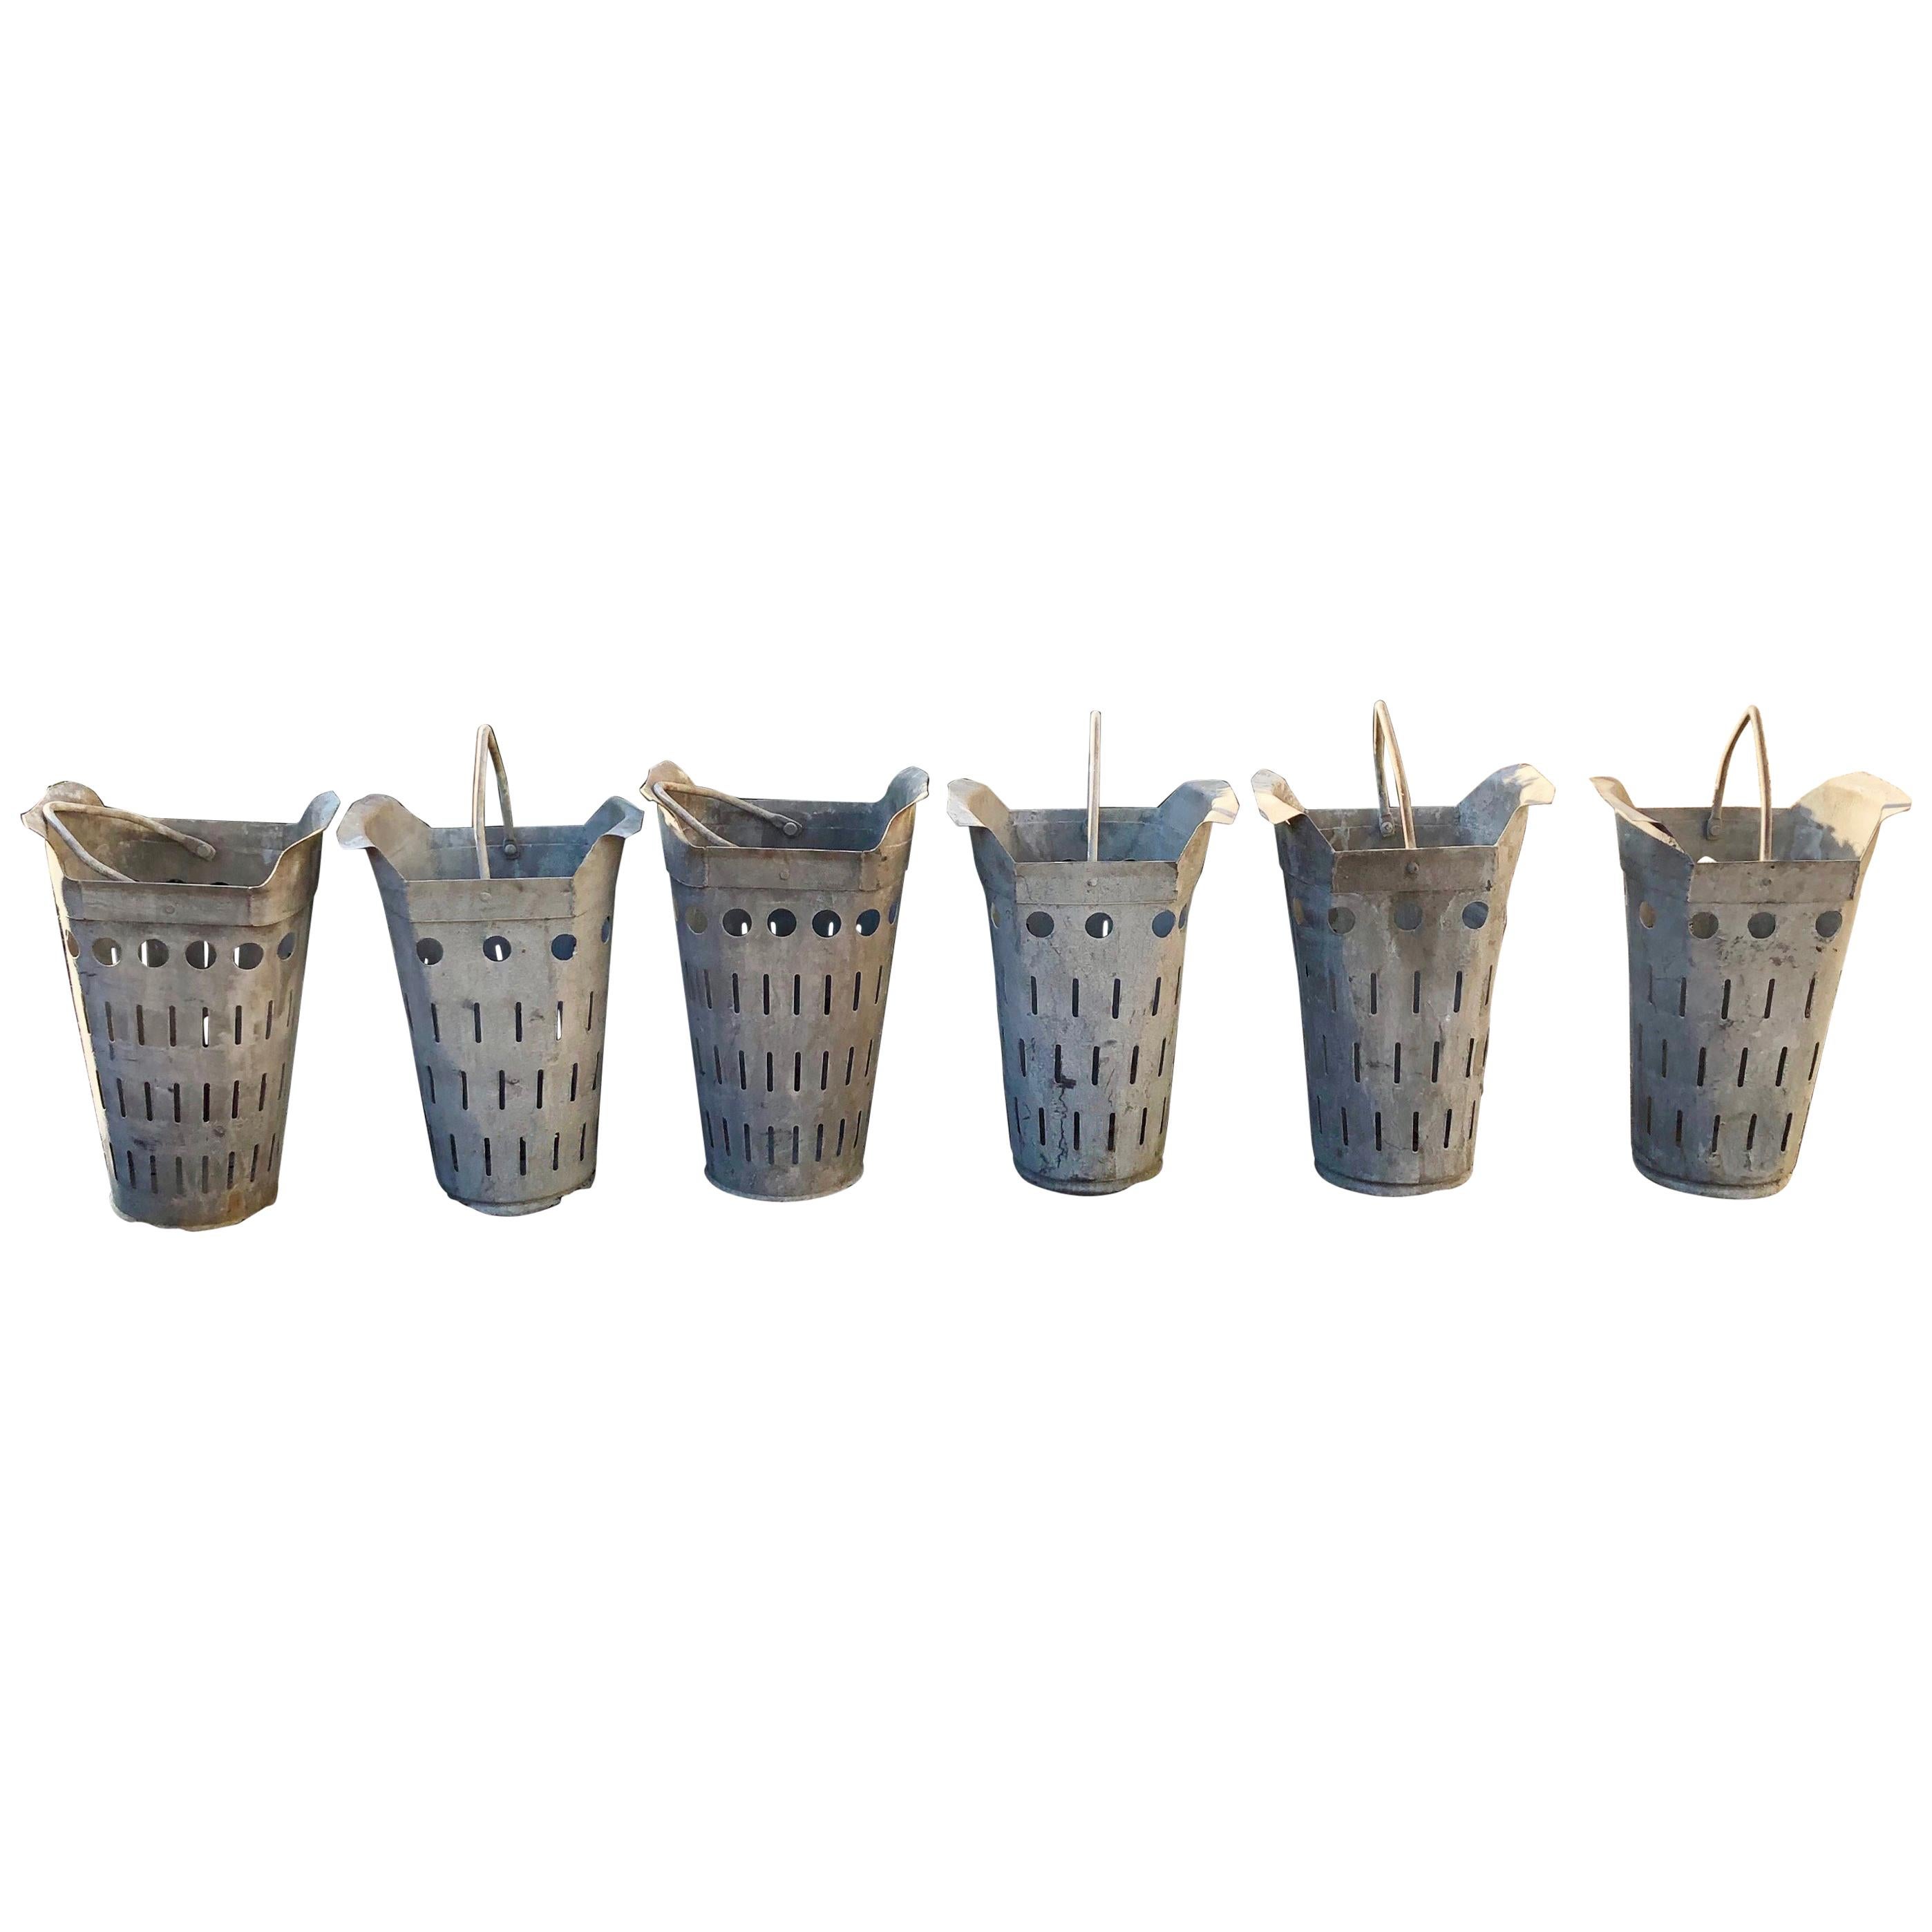 Two Pairs of French Perforated Zinc Florist Pots with Handles